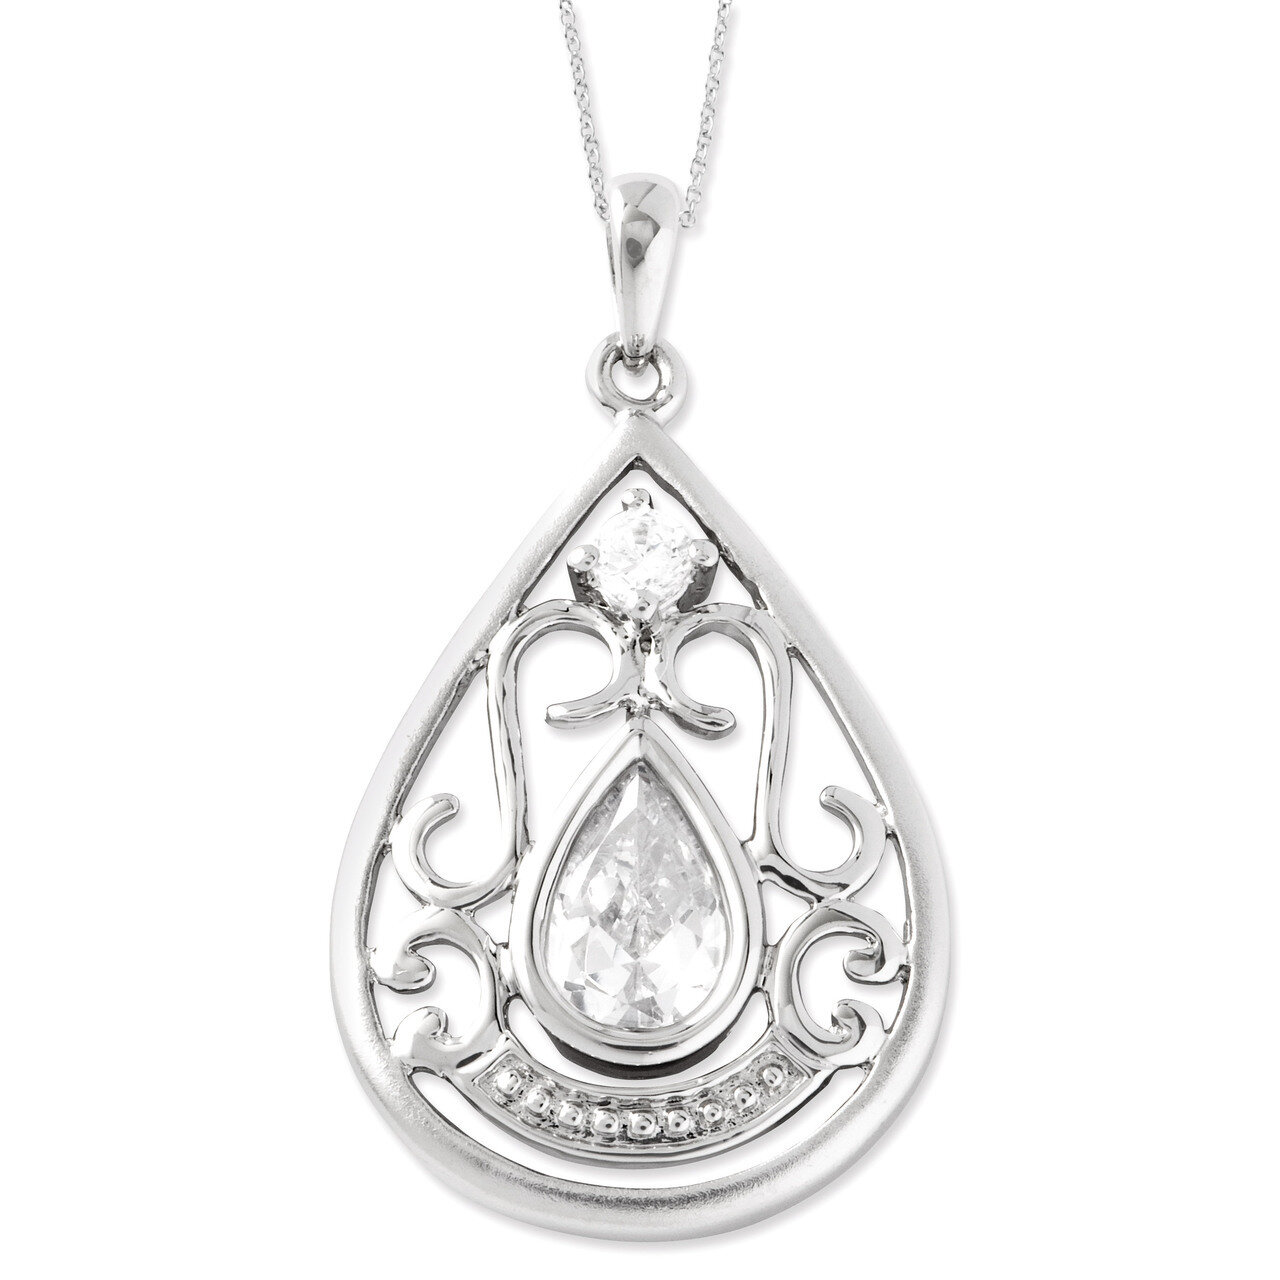 In Loving Memory 18 Inch Necklace Sterling Silver with Diamonds QSX529